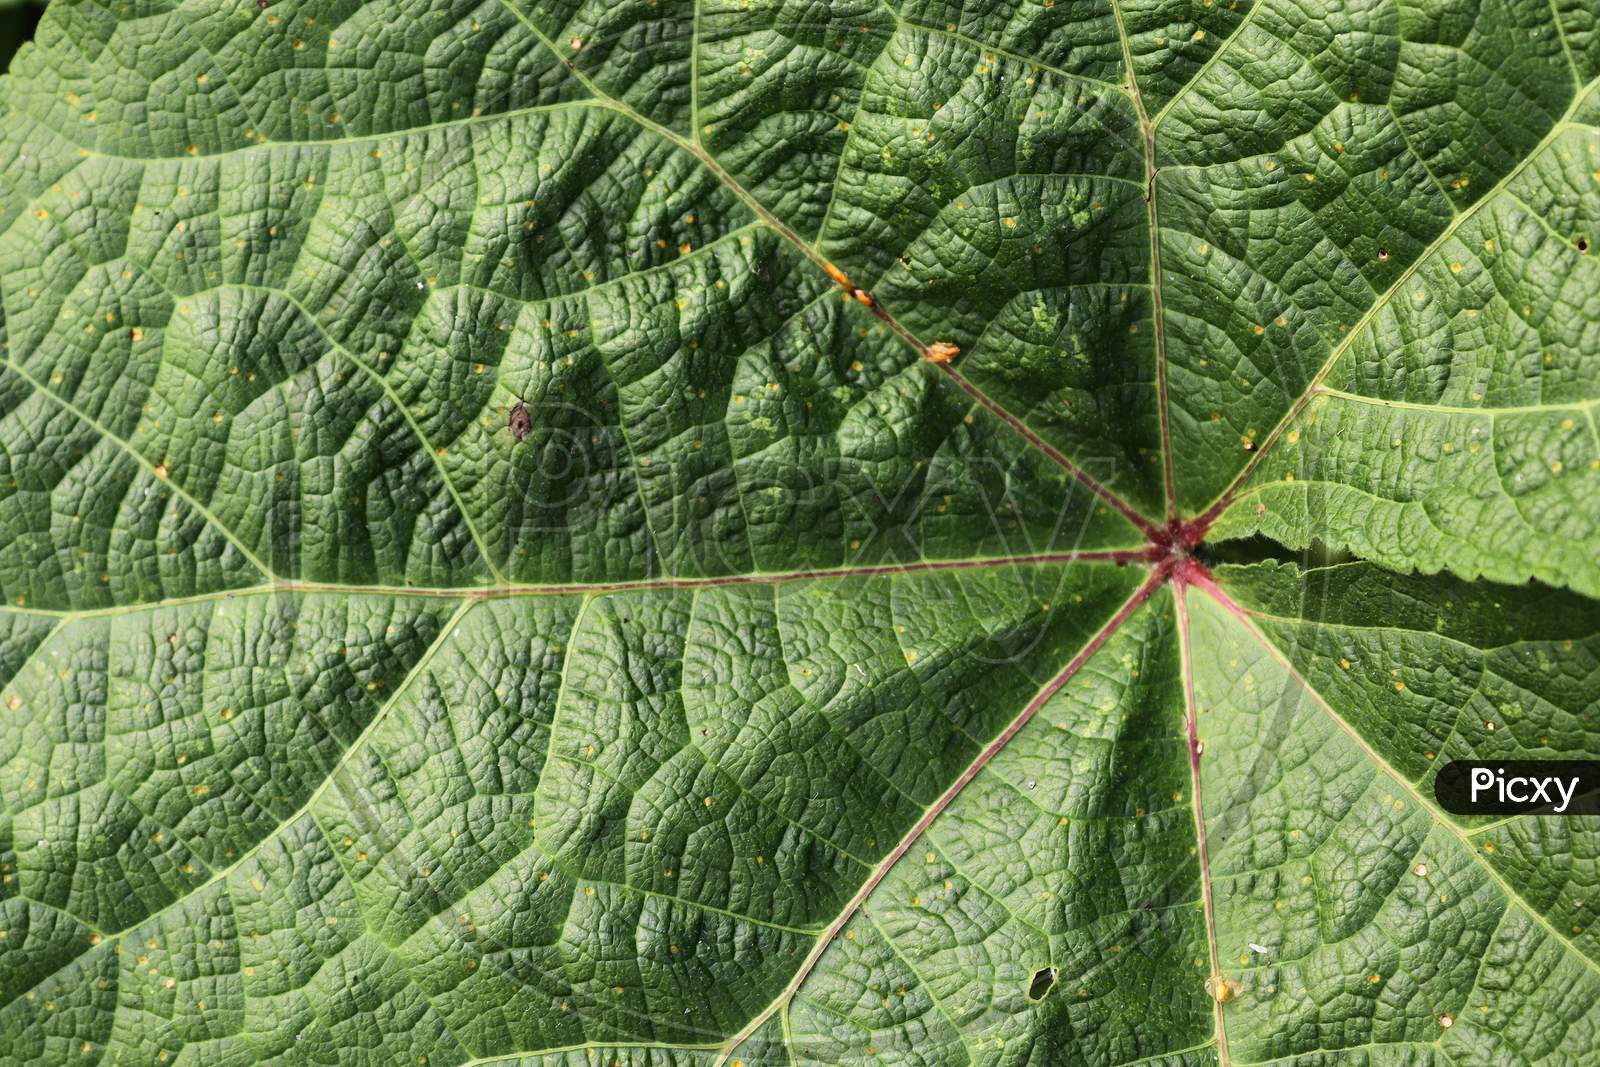 Beautiful close up of agricultural plants and leaves